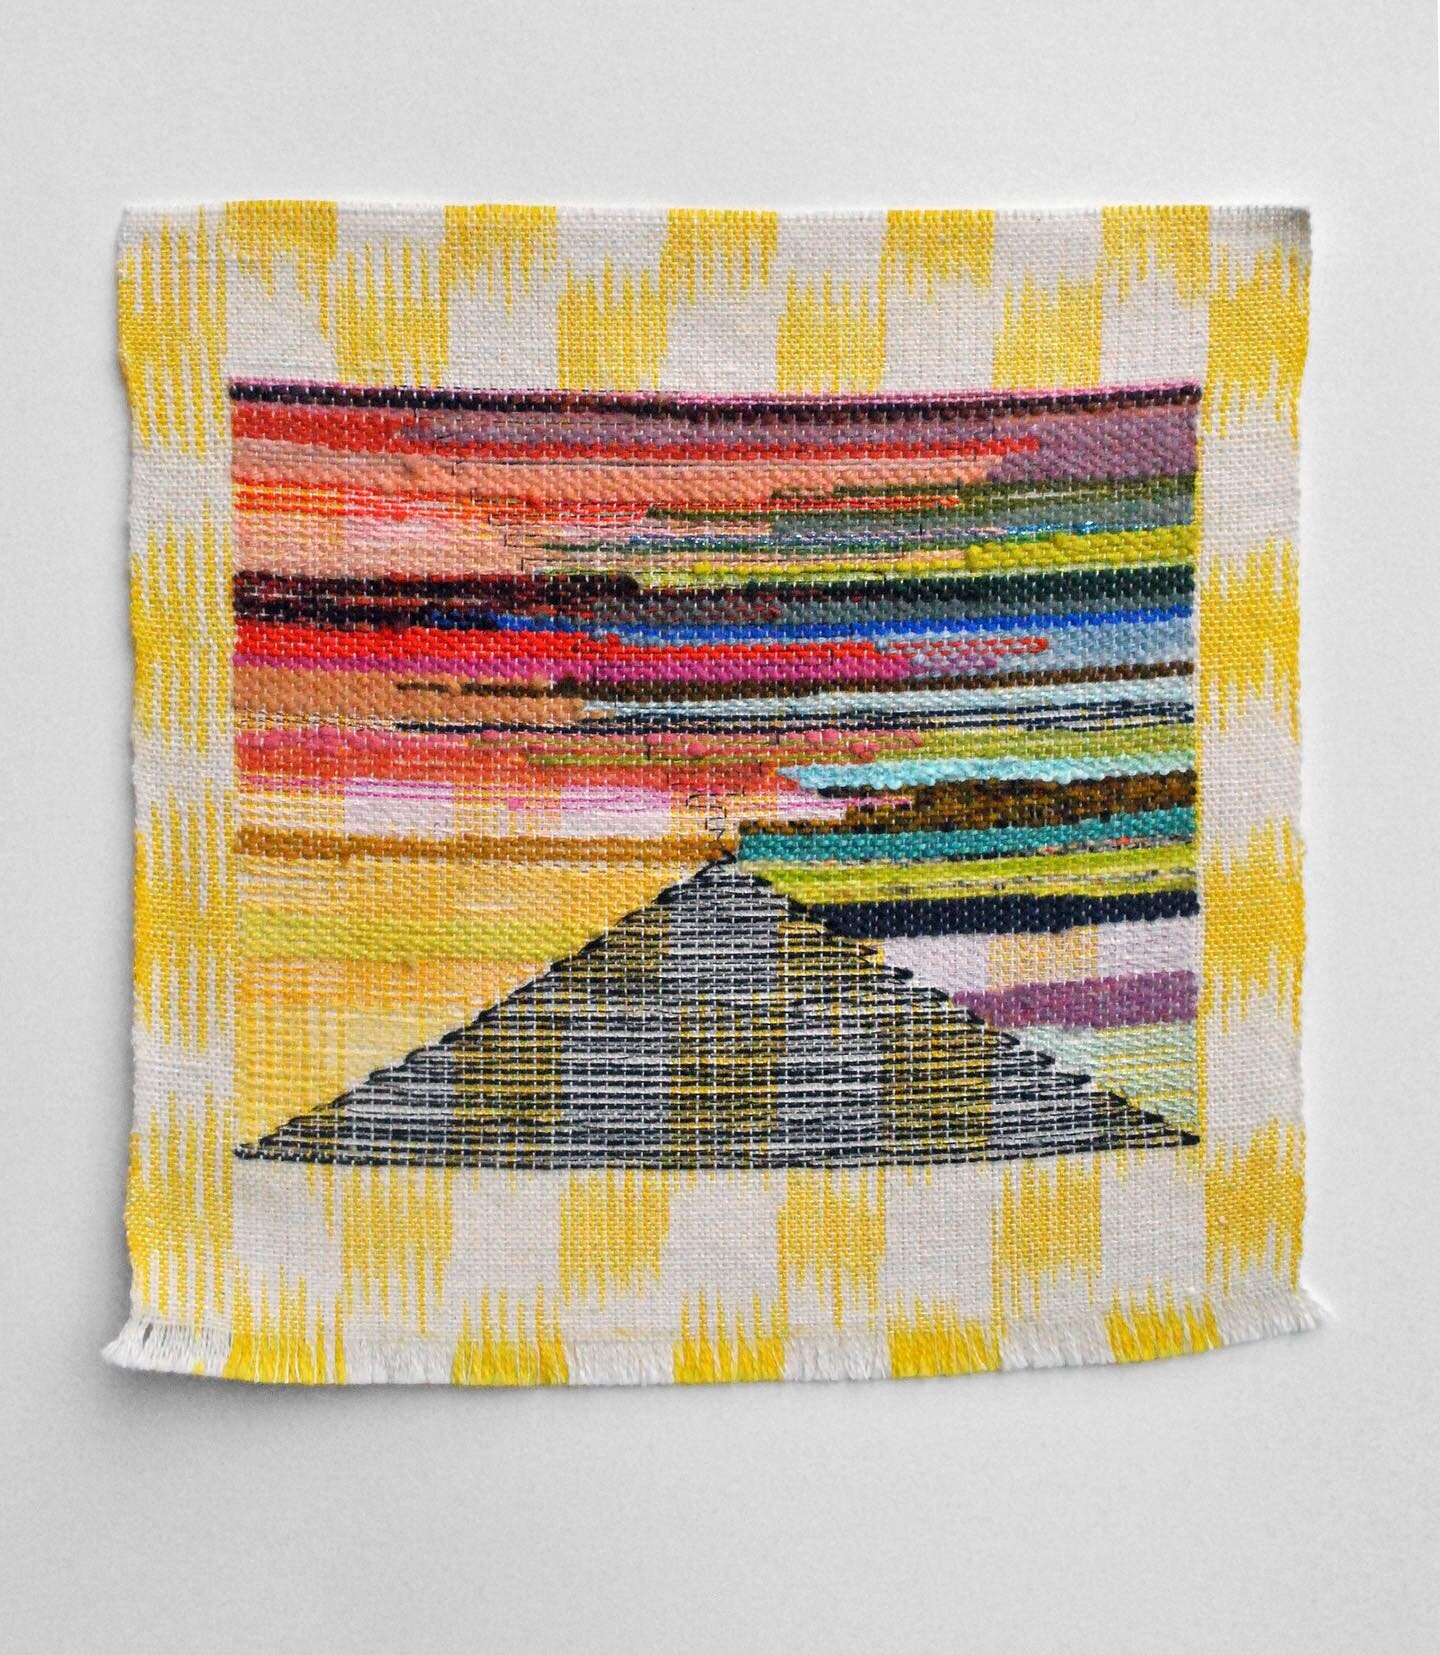 &lsquo;Alchemy&rsquo; is going up in my online shop on this Monday 3.14 at 11a EST 🪅 This piece, woven with hand dyed cotton, linen, wool, and mixed fiber, measures 11&rdquo; x 11.&rdquo; I woke up at my artist residency trying to reconcile with the